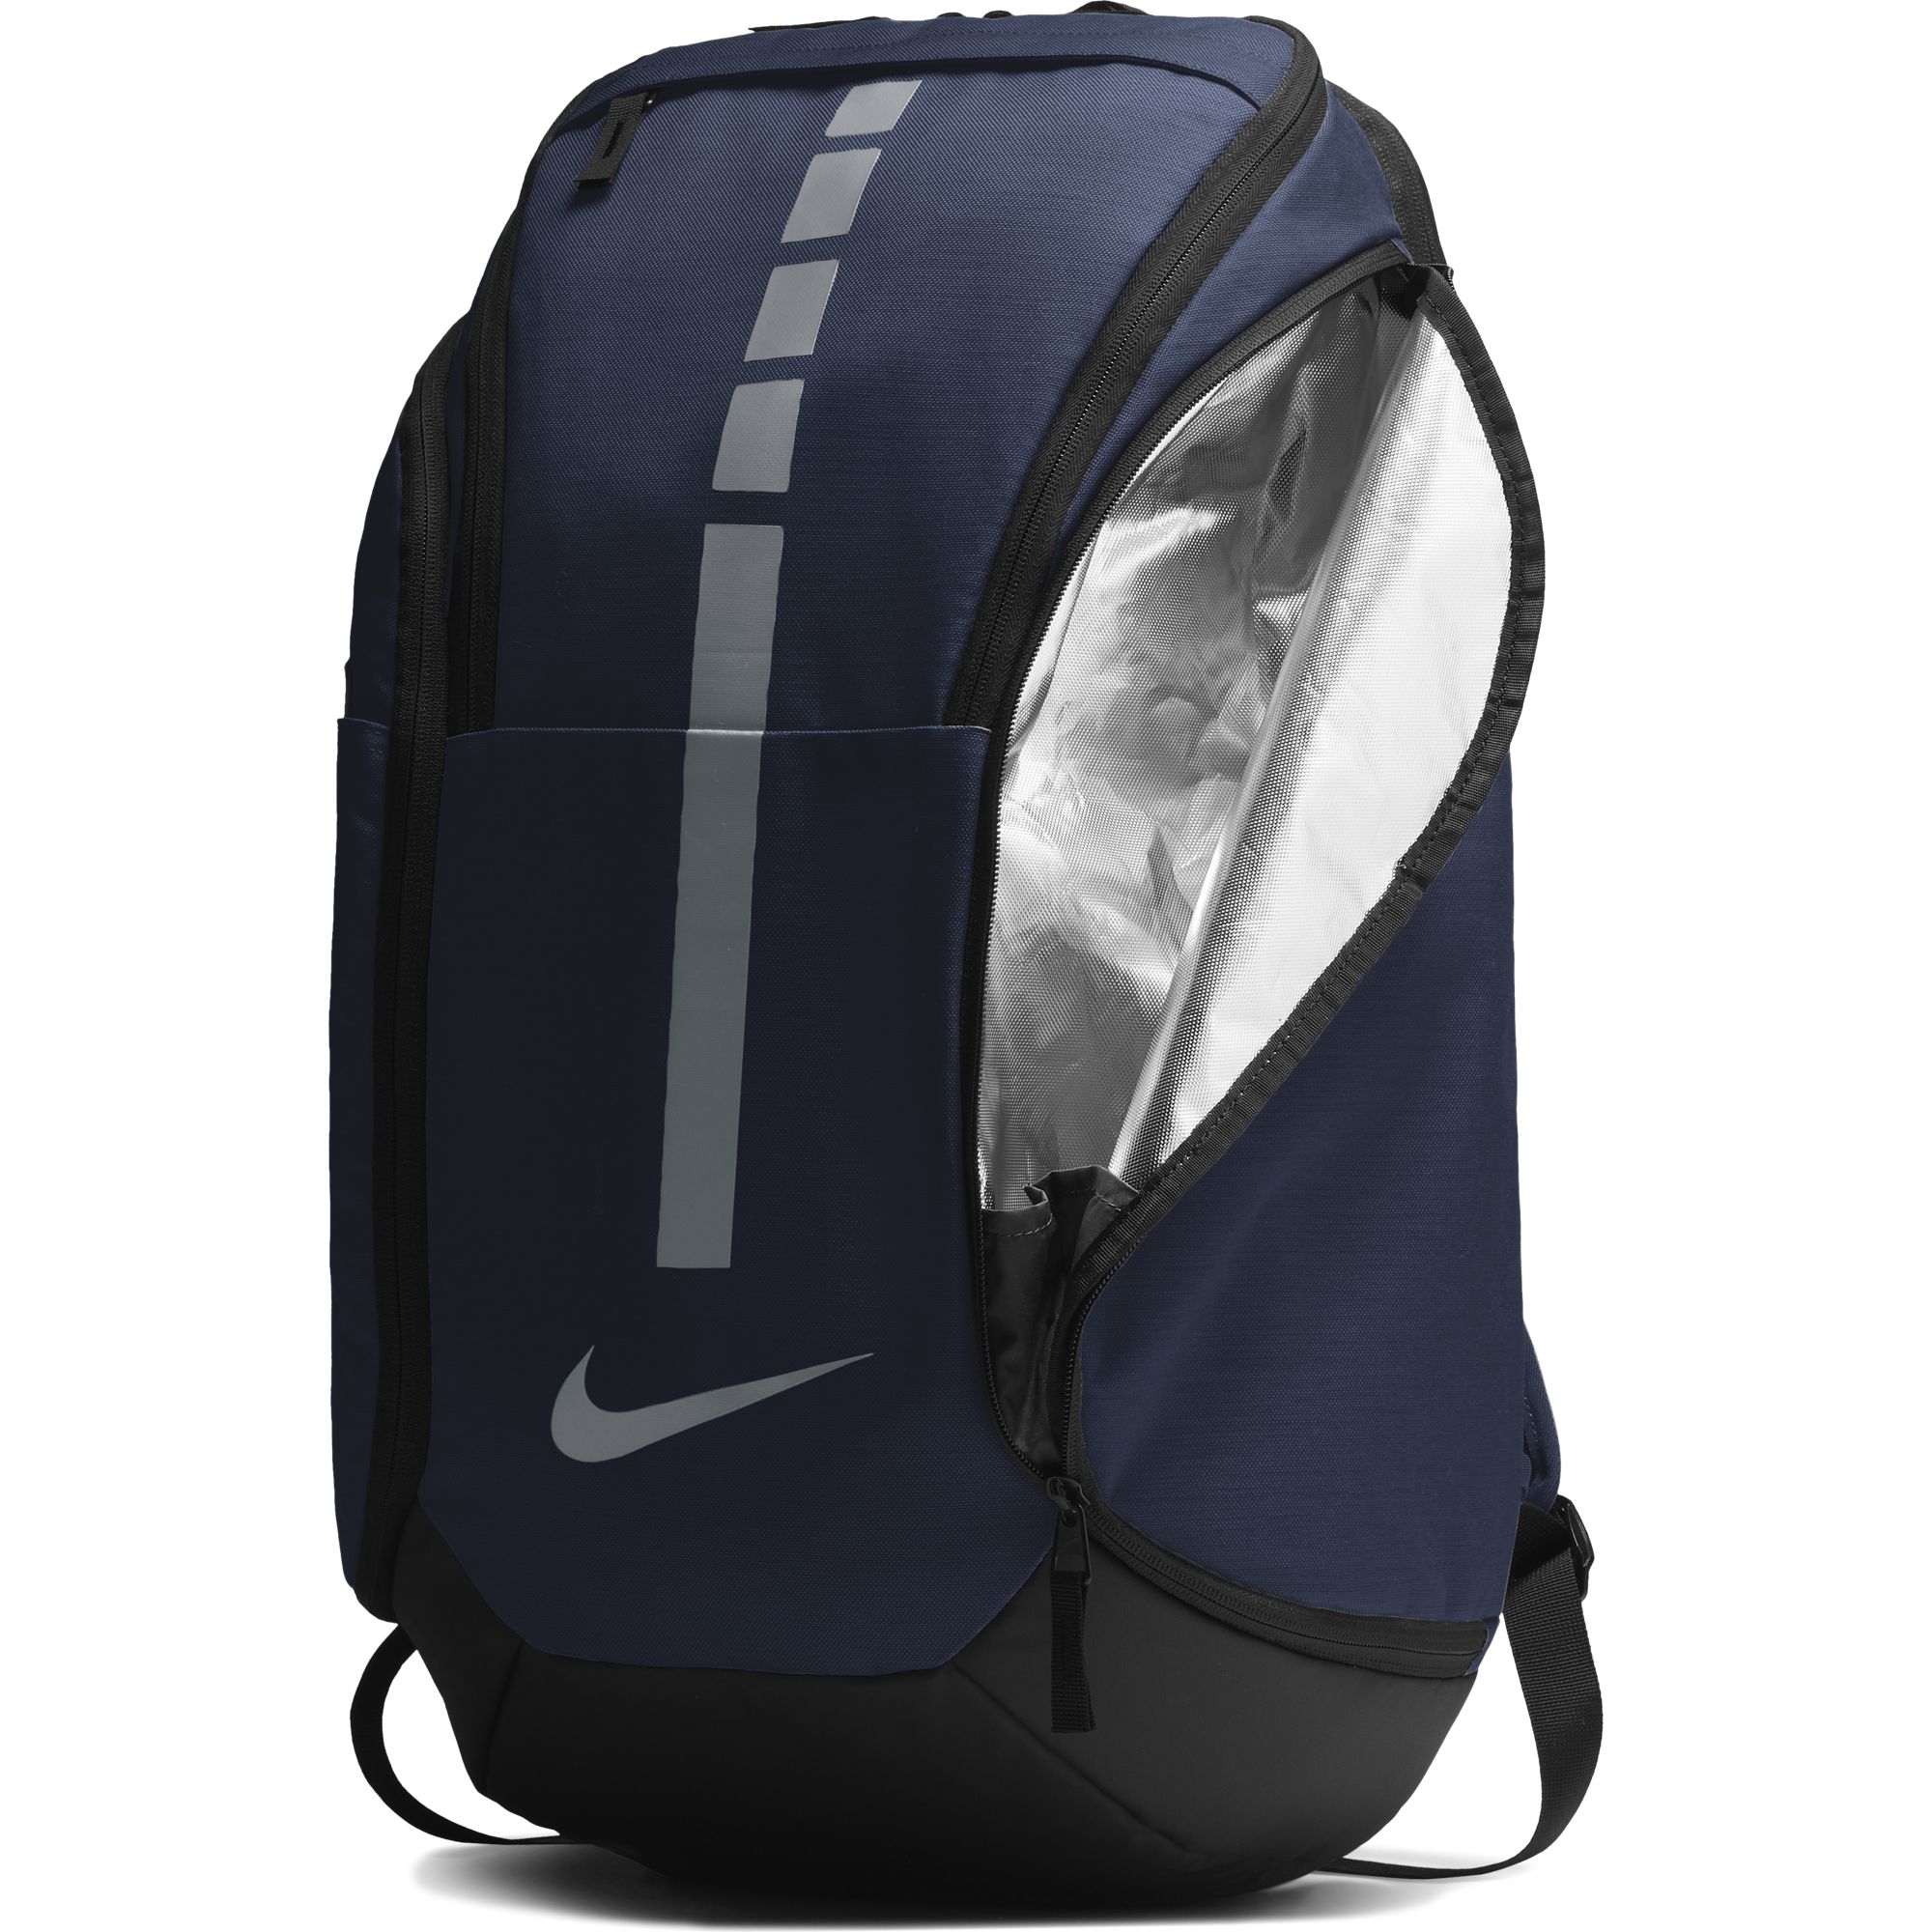 basketball backpack with shoe compartment